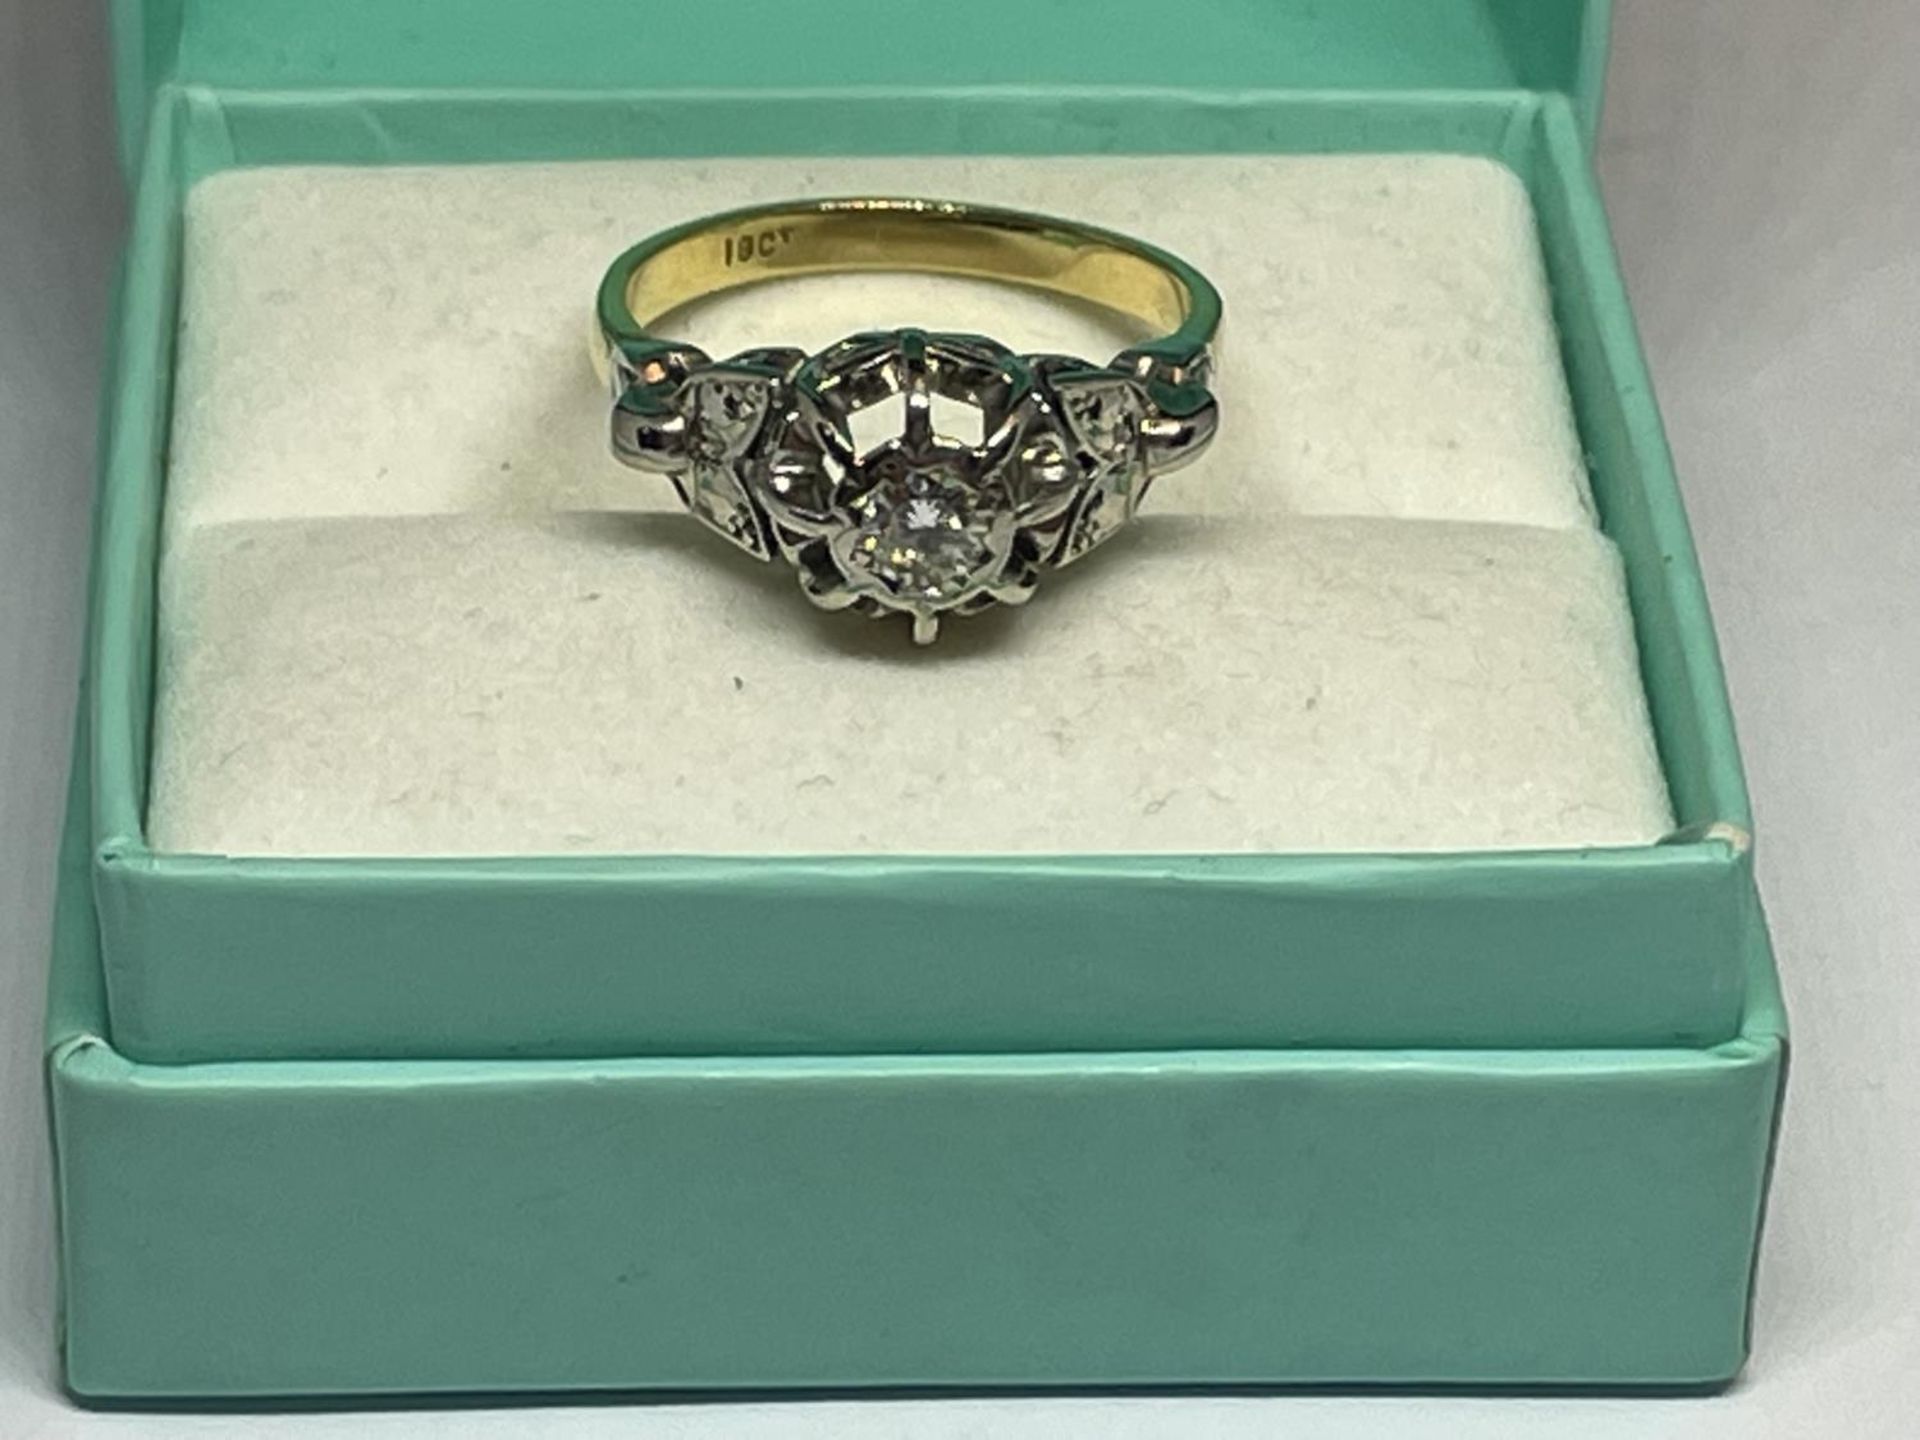 AN 18 CARAT GOLD AND PLATINUM DIAMOND SOLITAIRE RING SIZE M/N IN A PRESENTATION BOX - Image 4 of 4